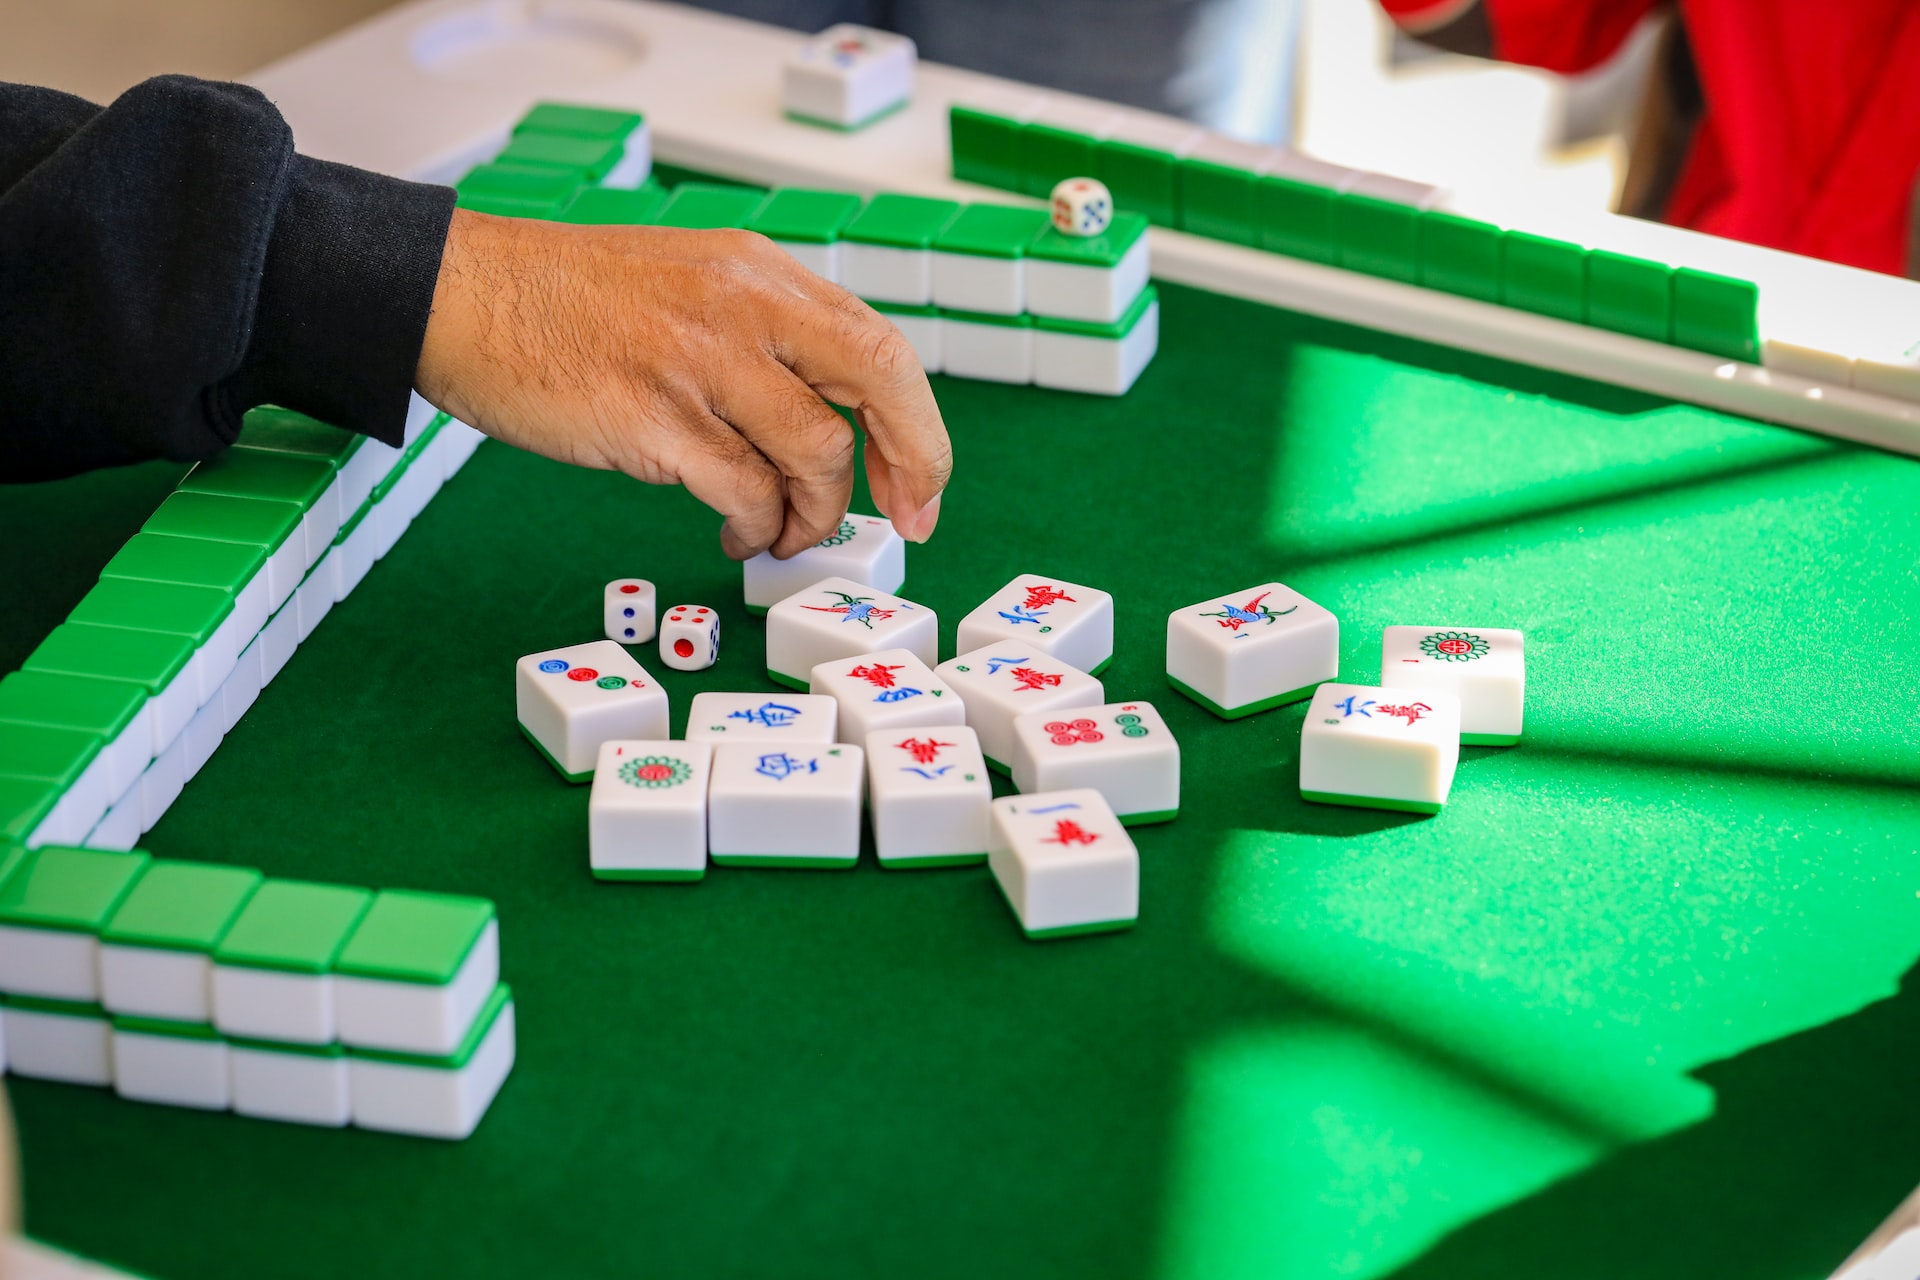 A Kid's Guide to Playing Mahjong